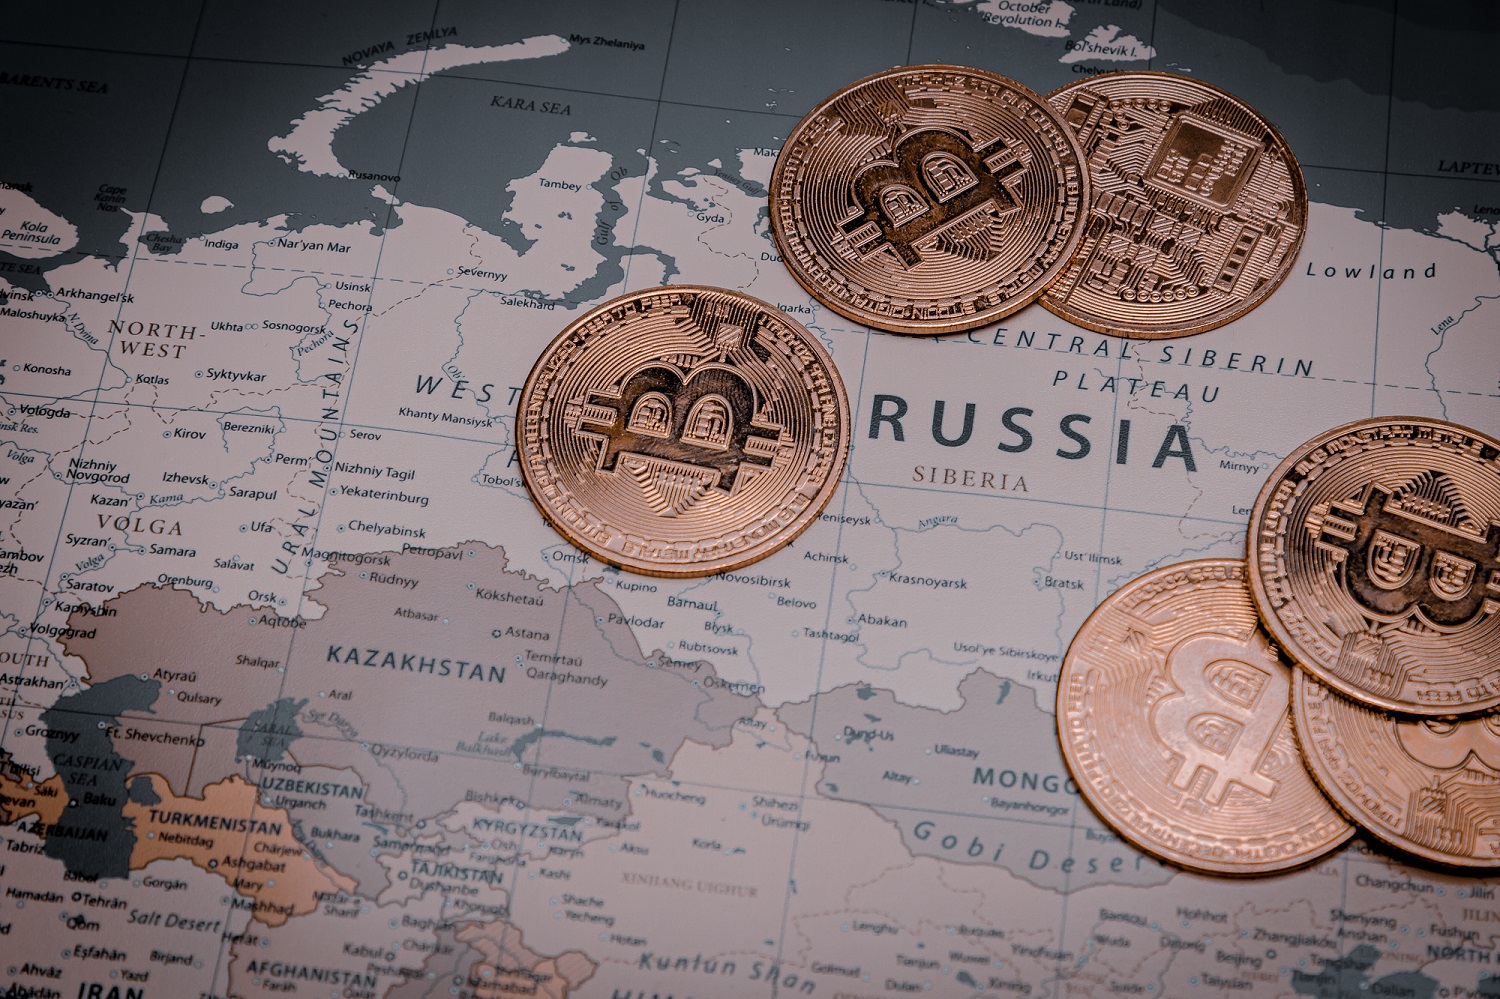 Tokens representing Bitcoin on an area representing Russia on a world map.